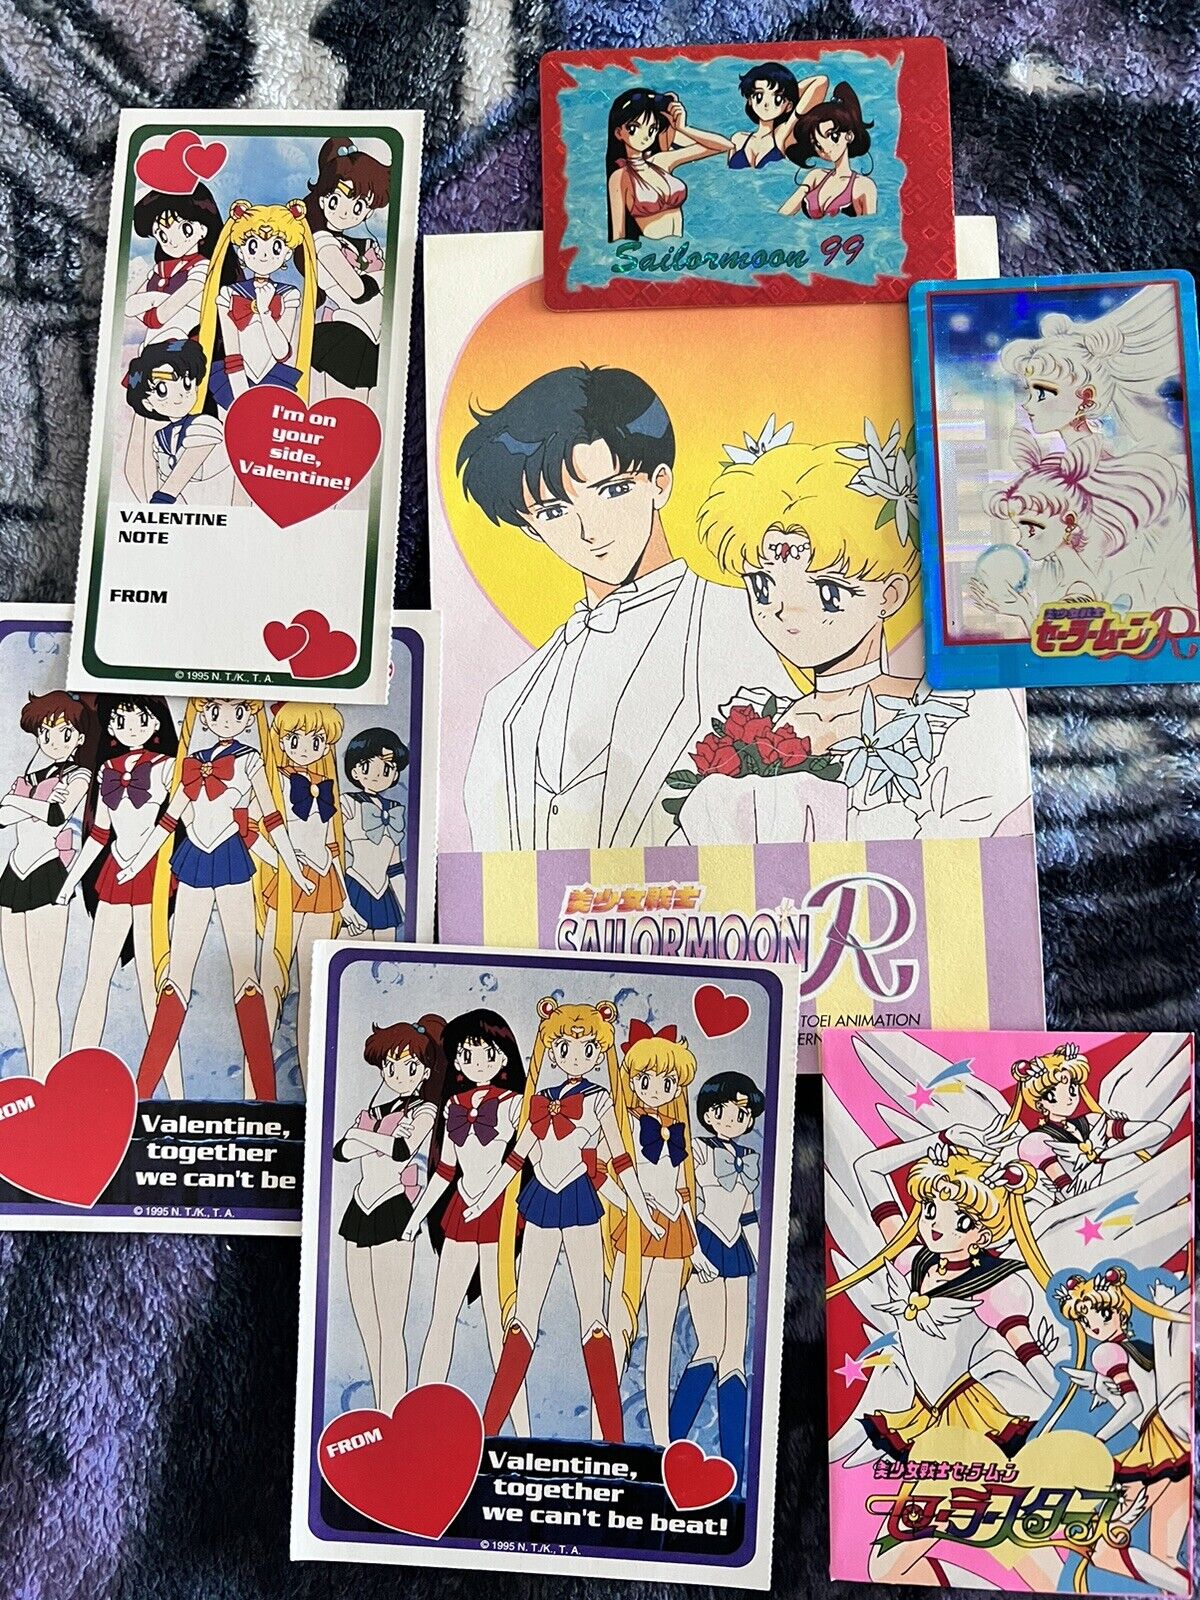 1995 Sailor Moon valentines stationary stickers lot of 7 prism stickers